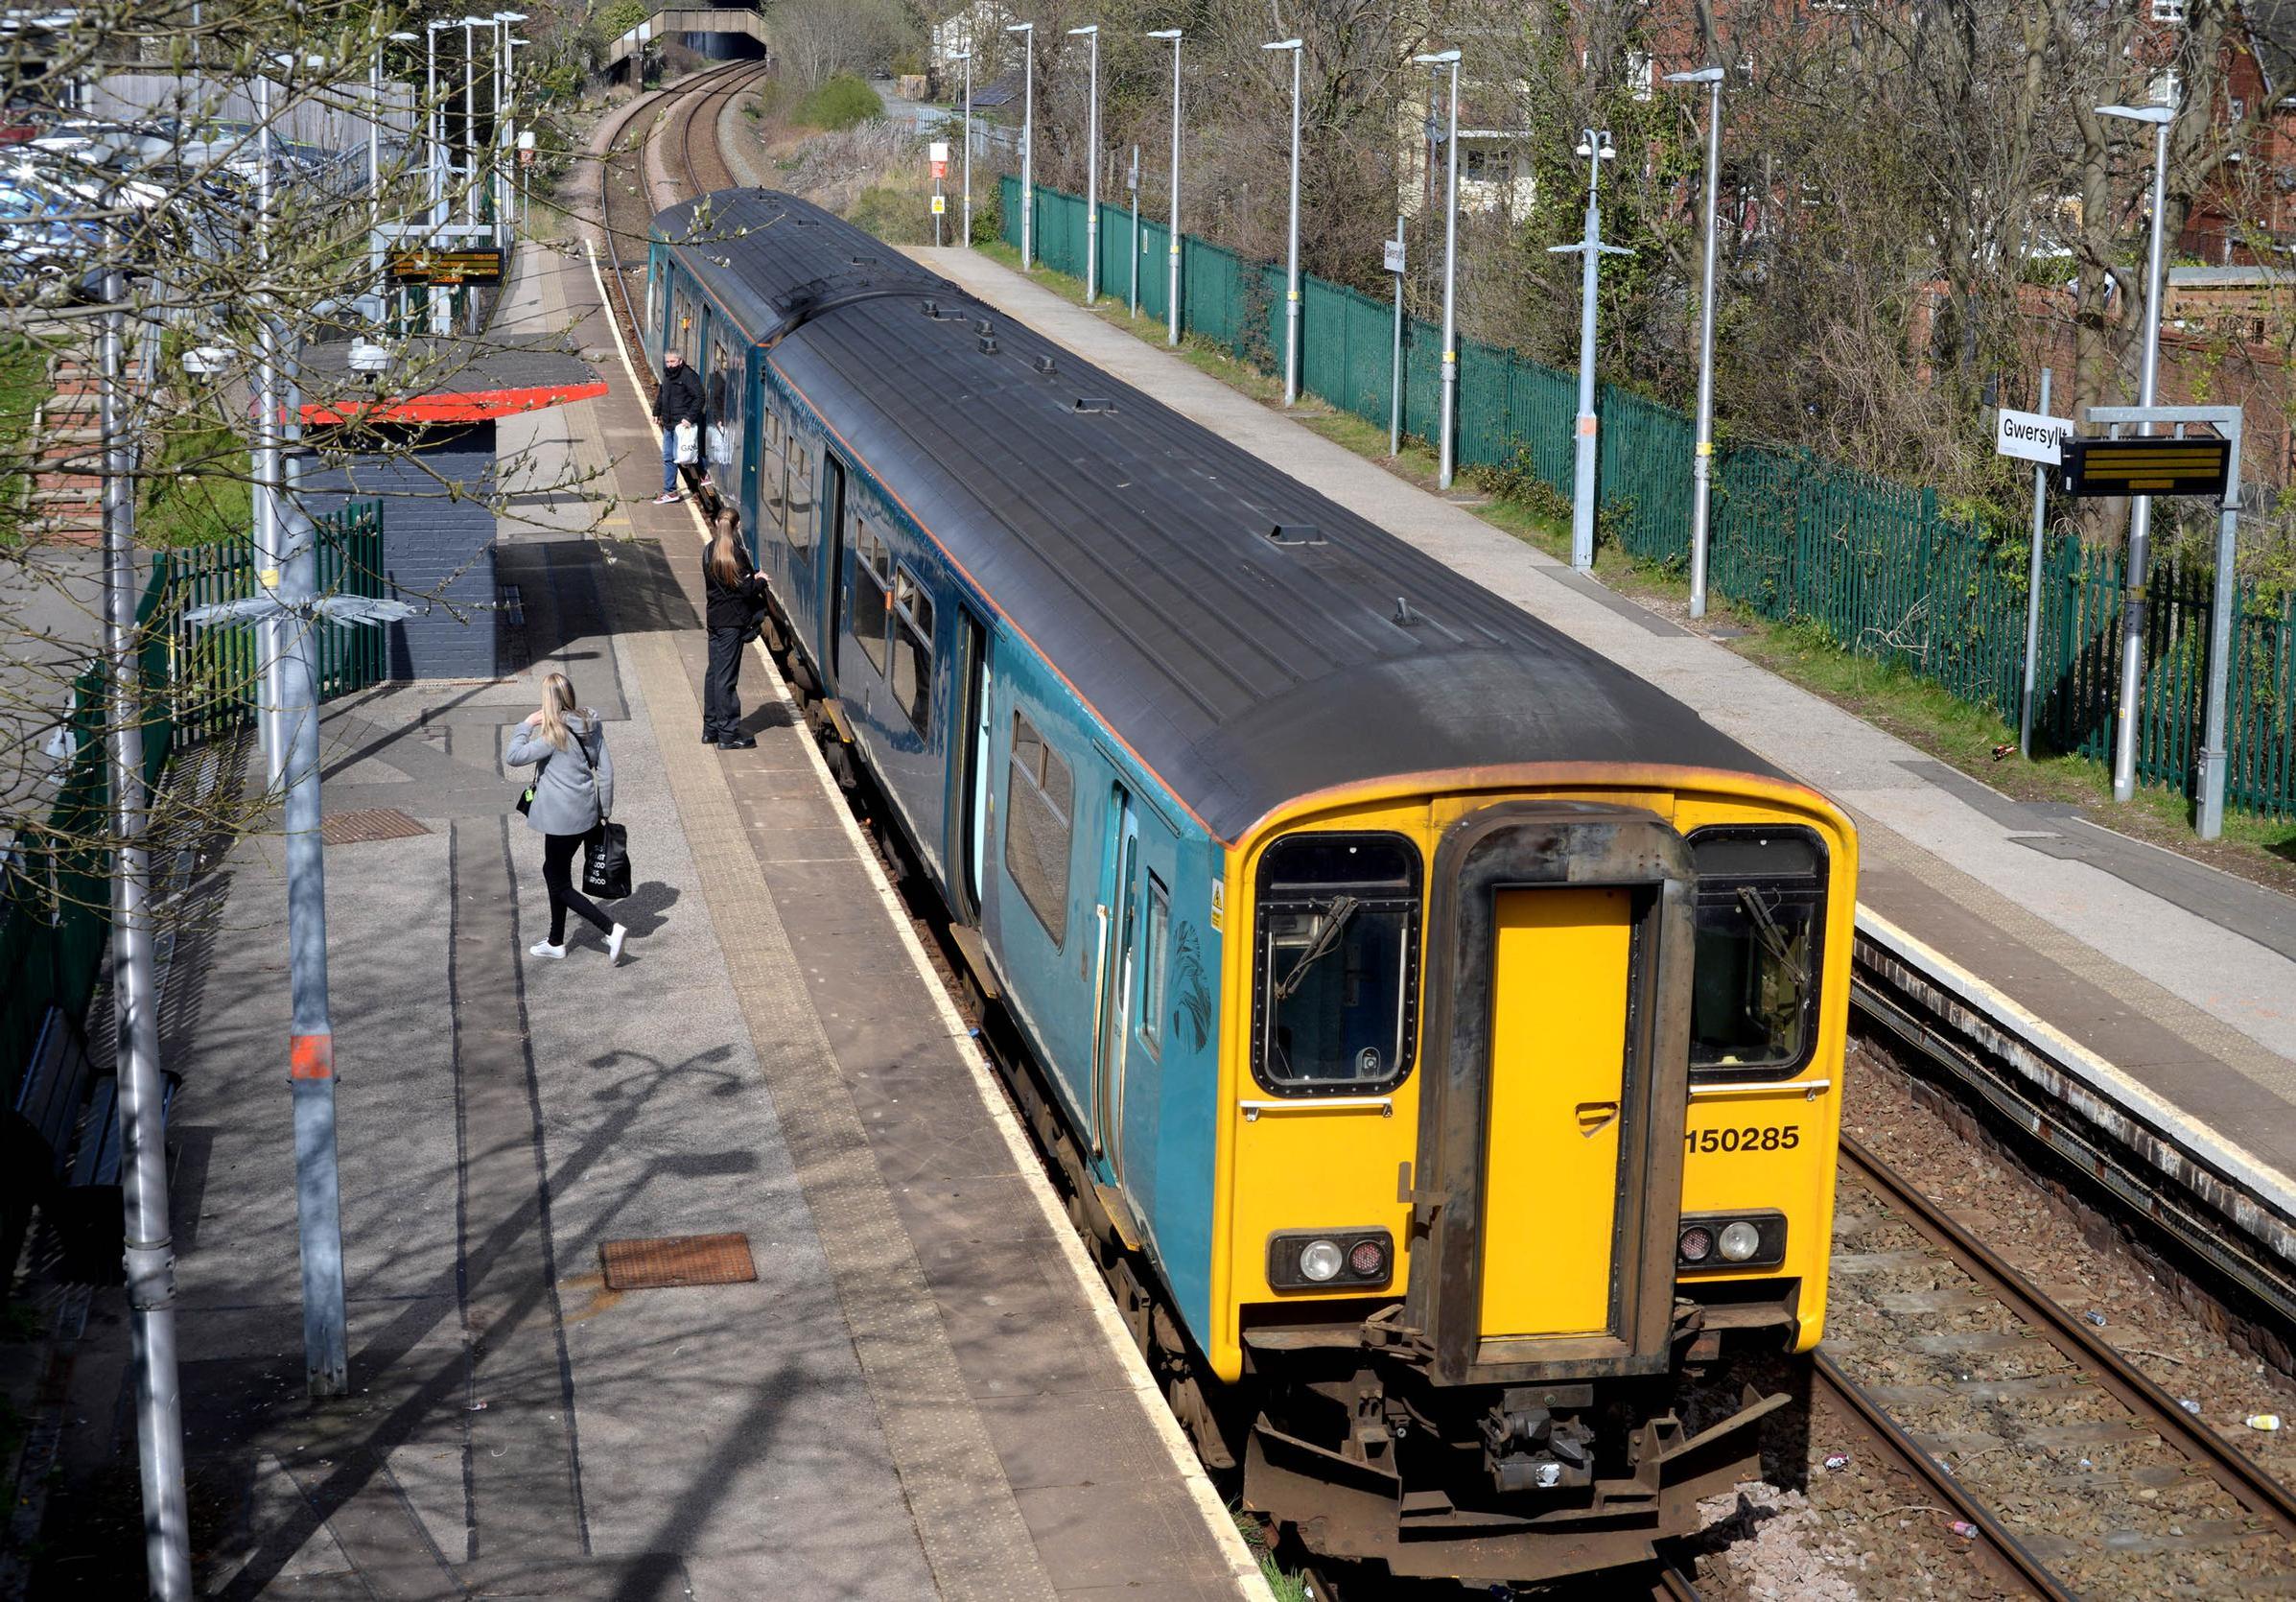 The Welsh Government have has brought local rail services back under direct control